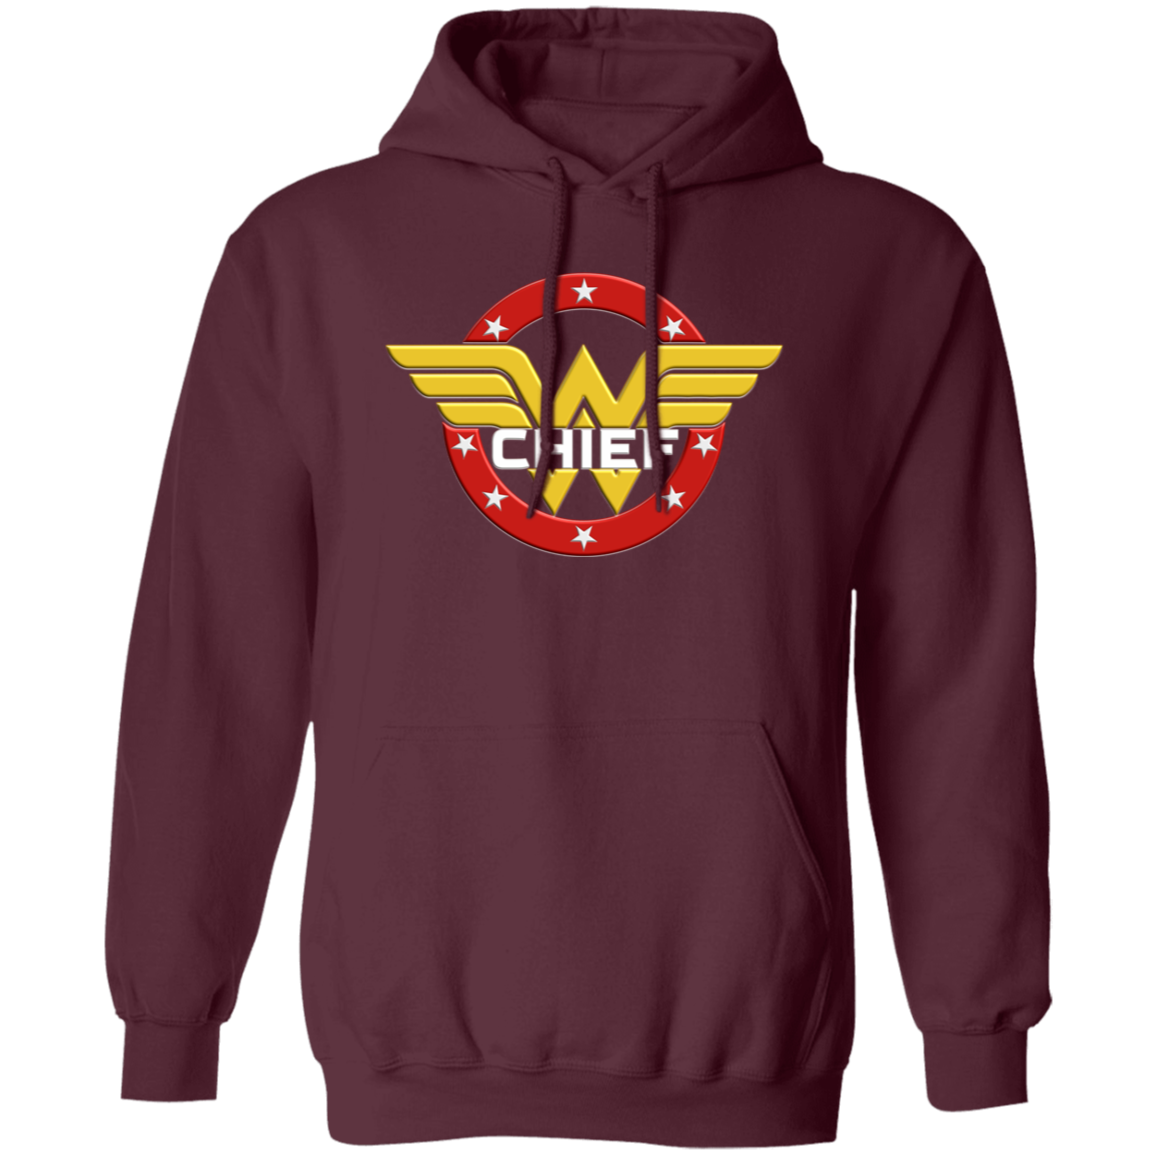 WW Chief Pullover Hoodie